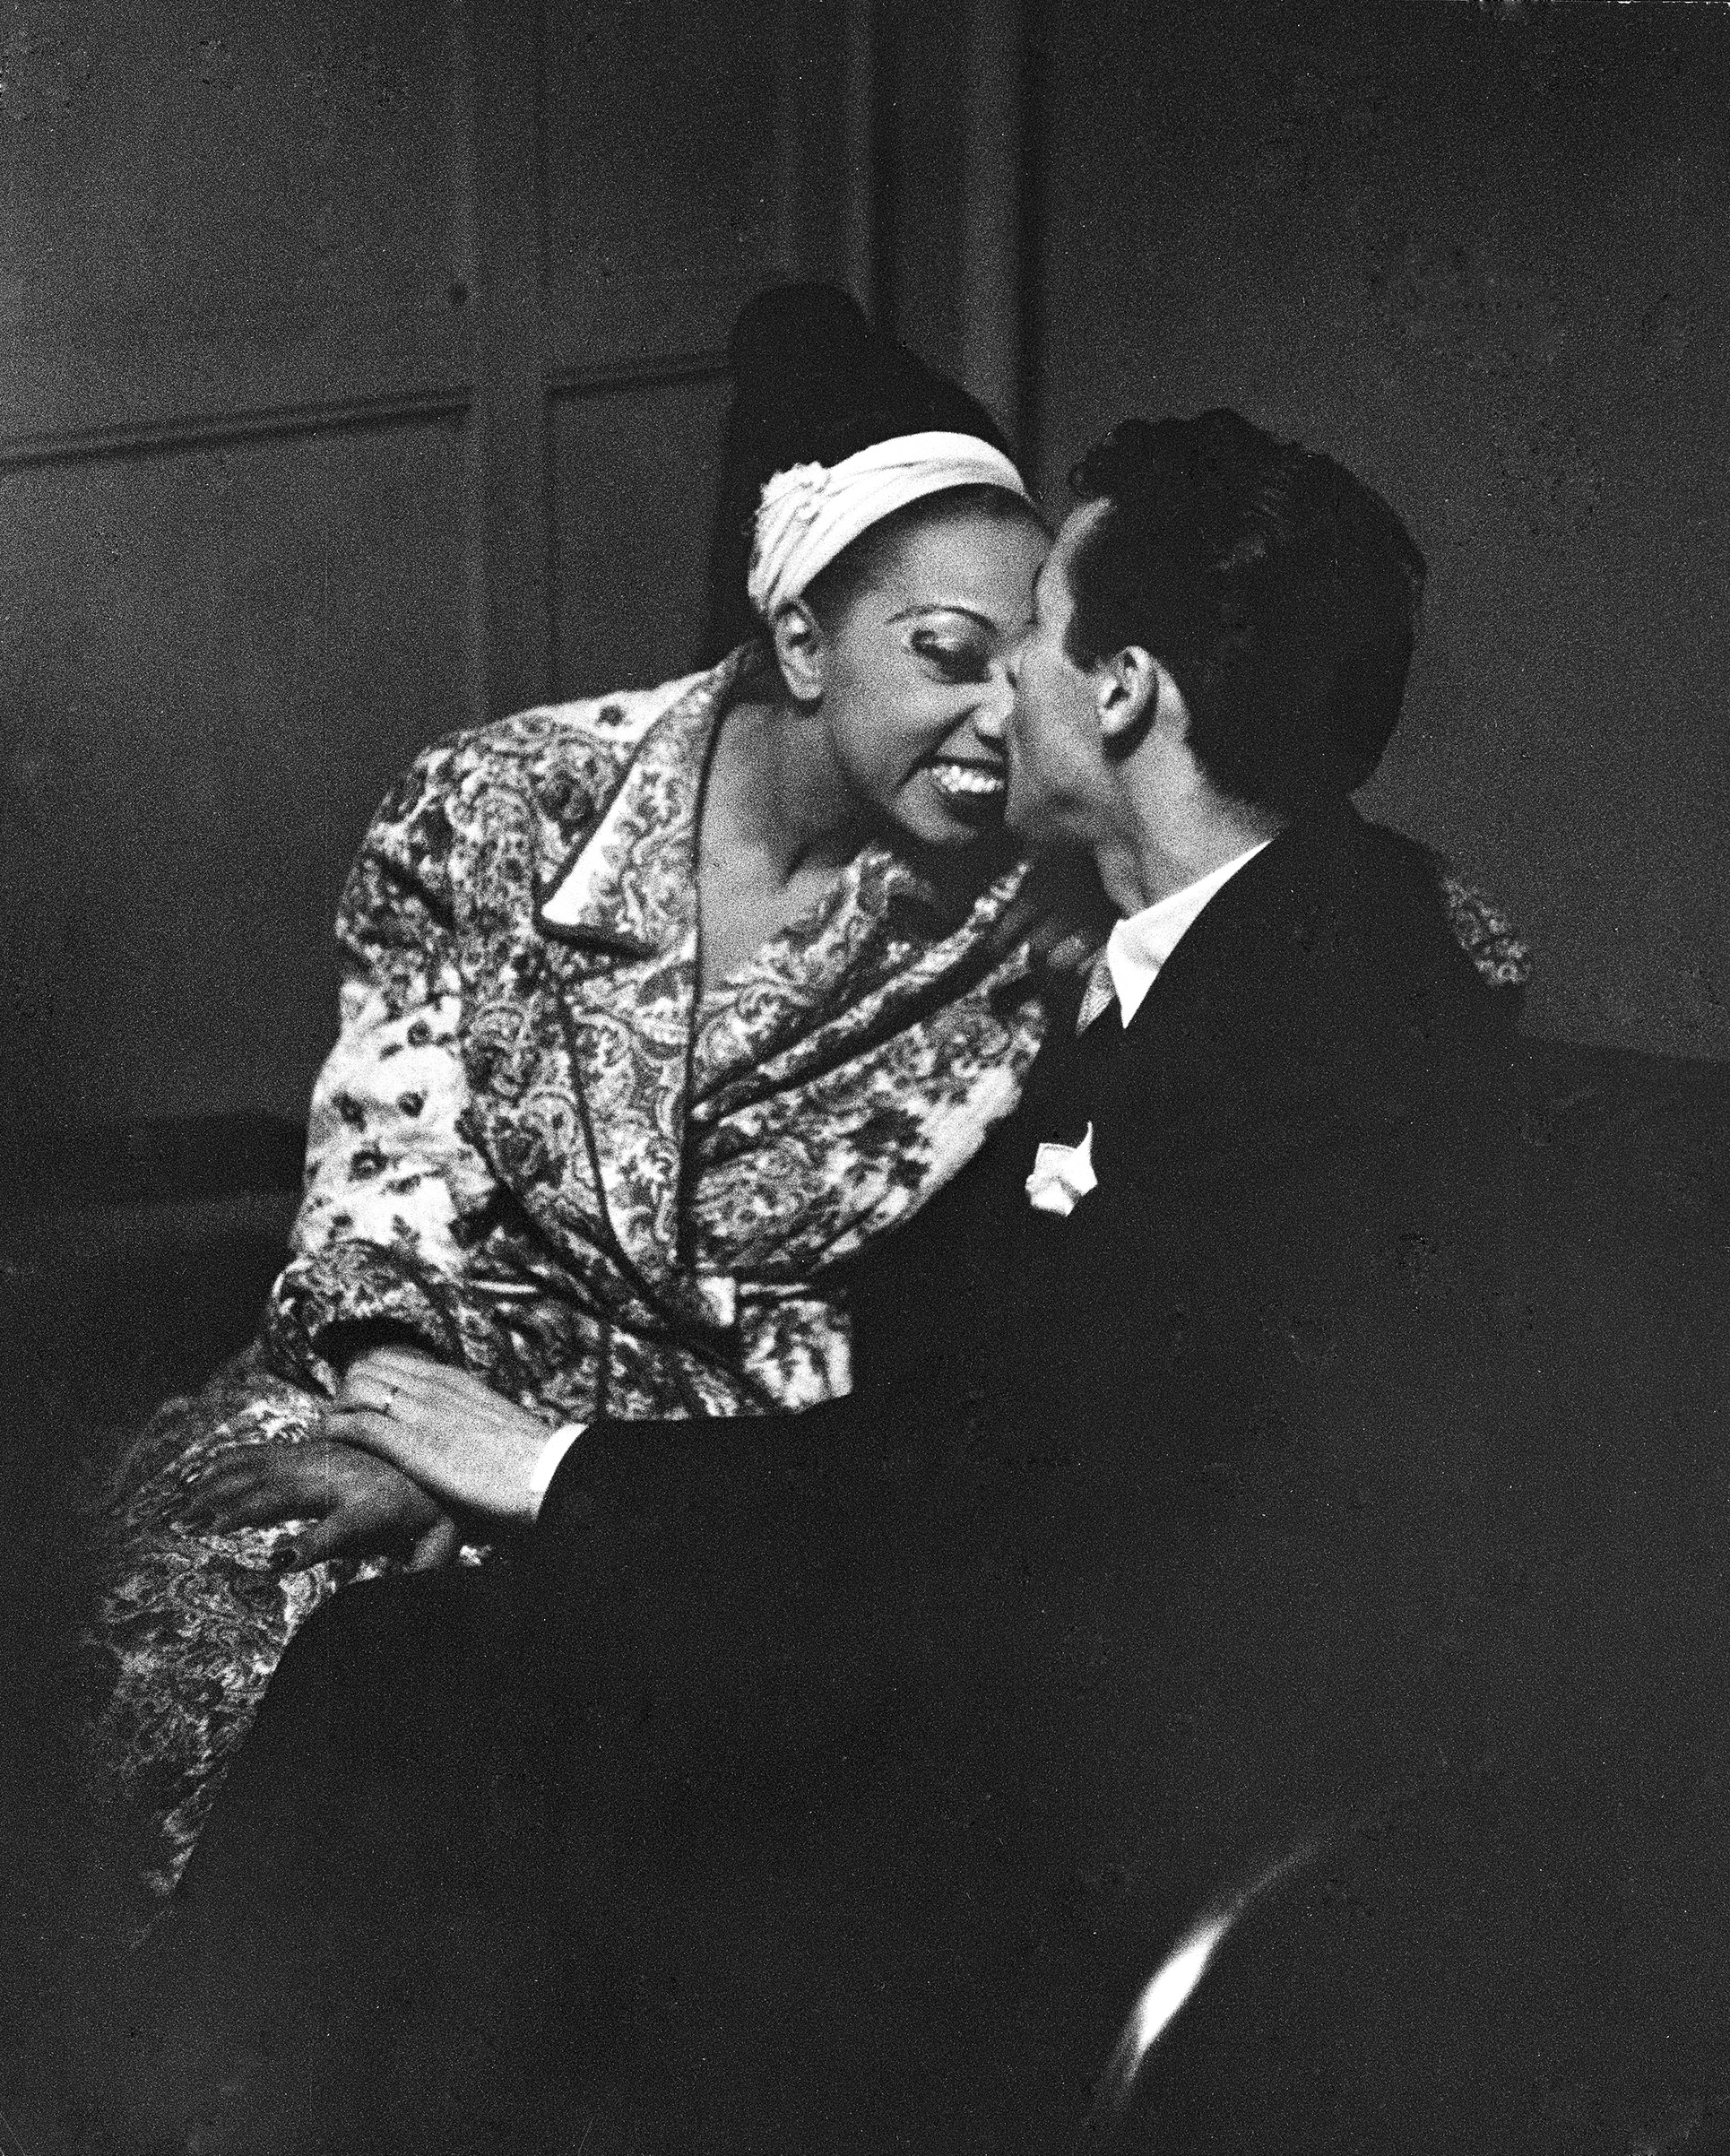 Josephine Baker receiving congratulatory kiss on the nose from her husband, orchestra leader Jo Bouillon, after her show at the Strand theater during her US tour. 1951.